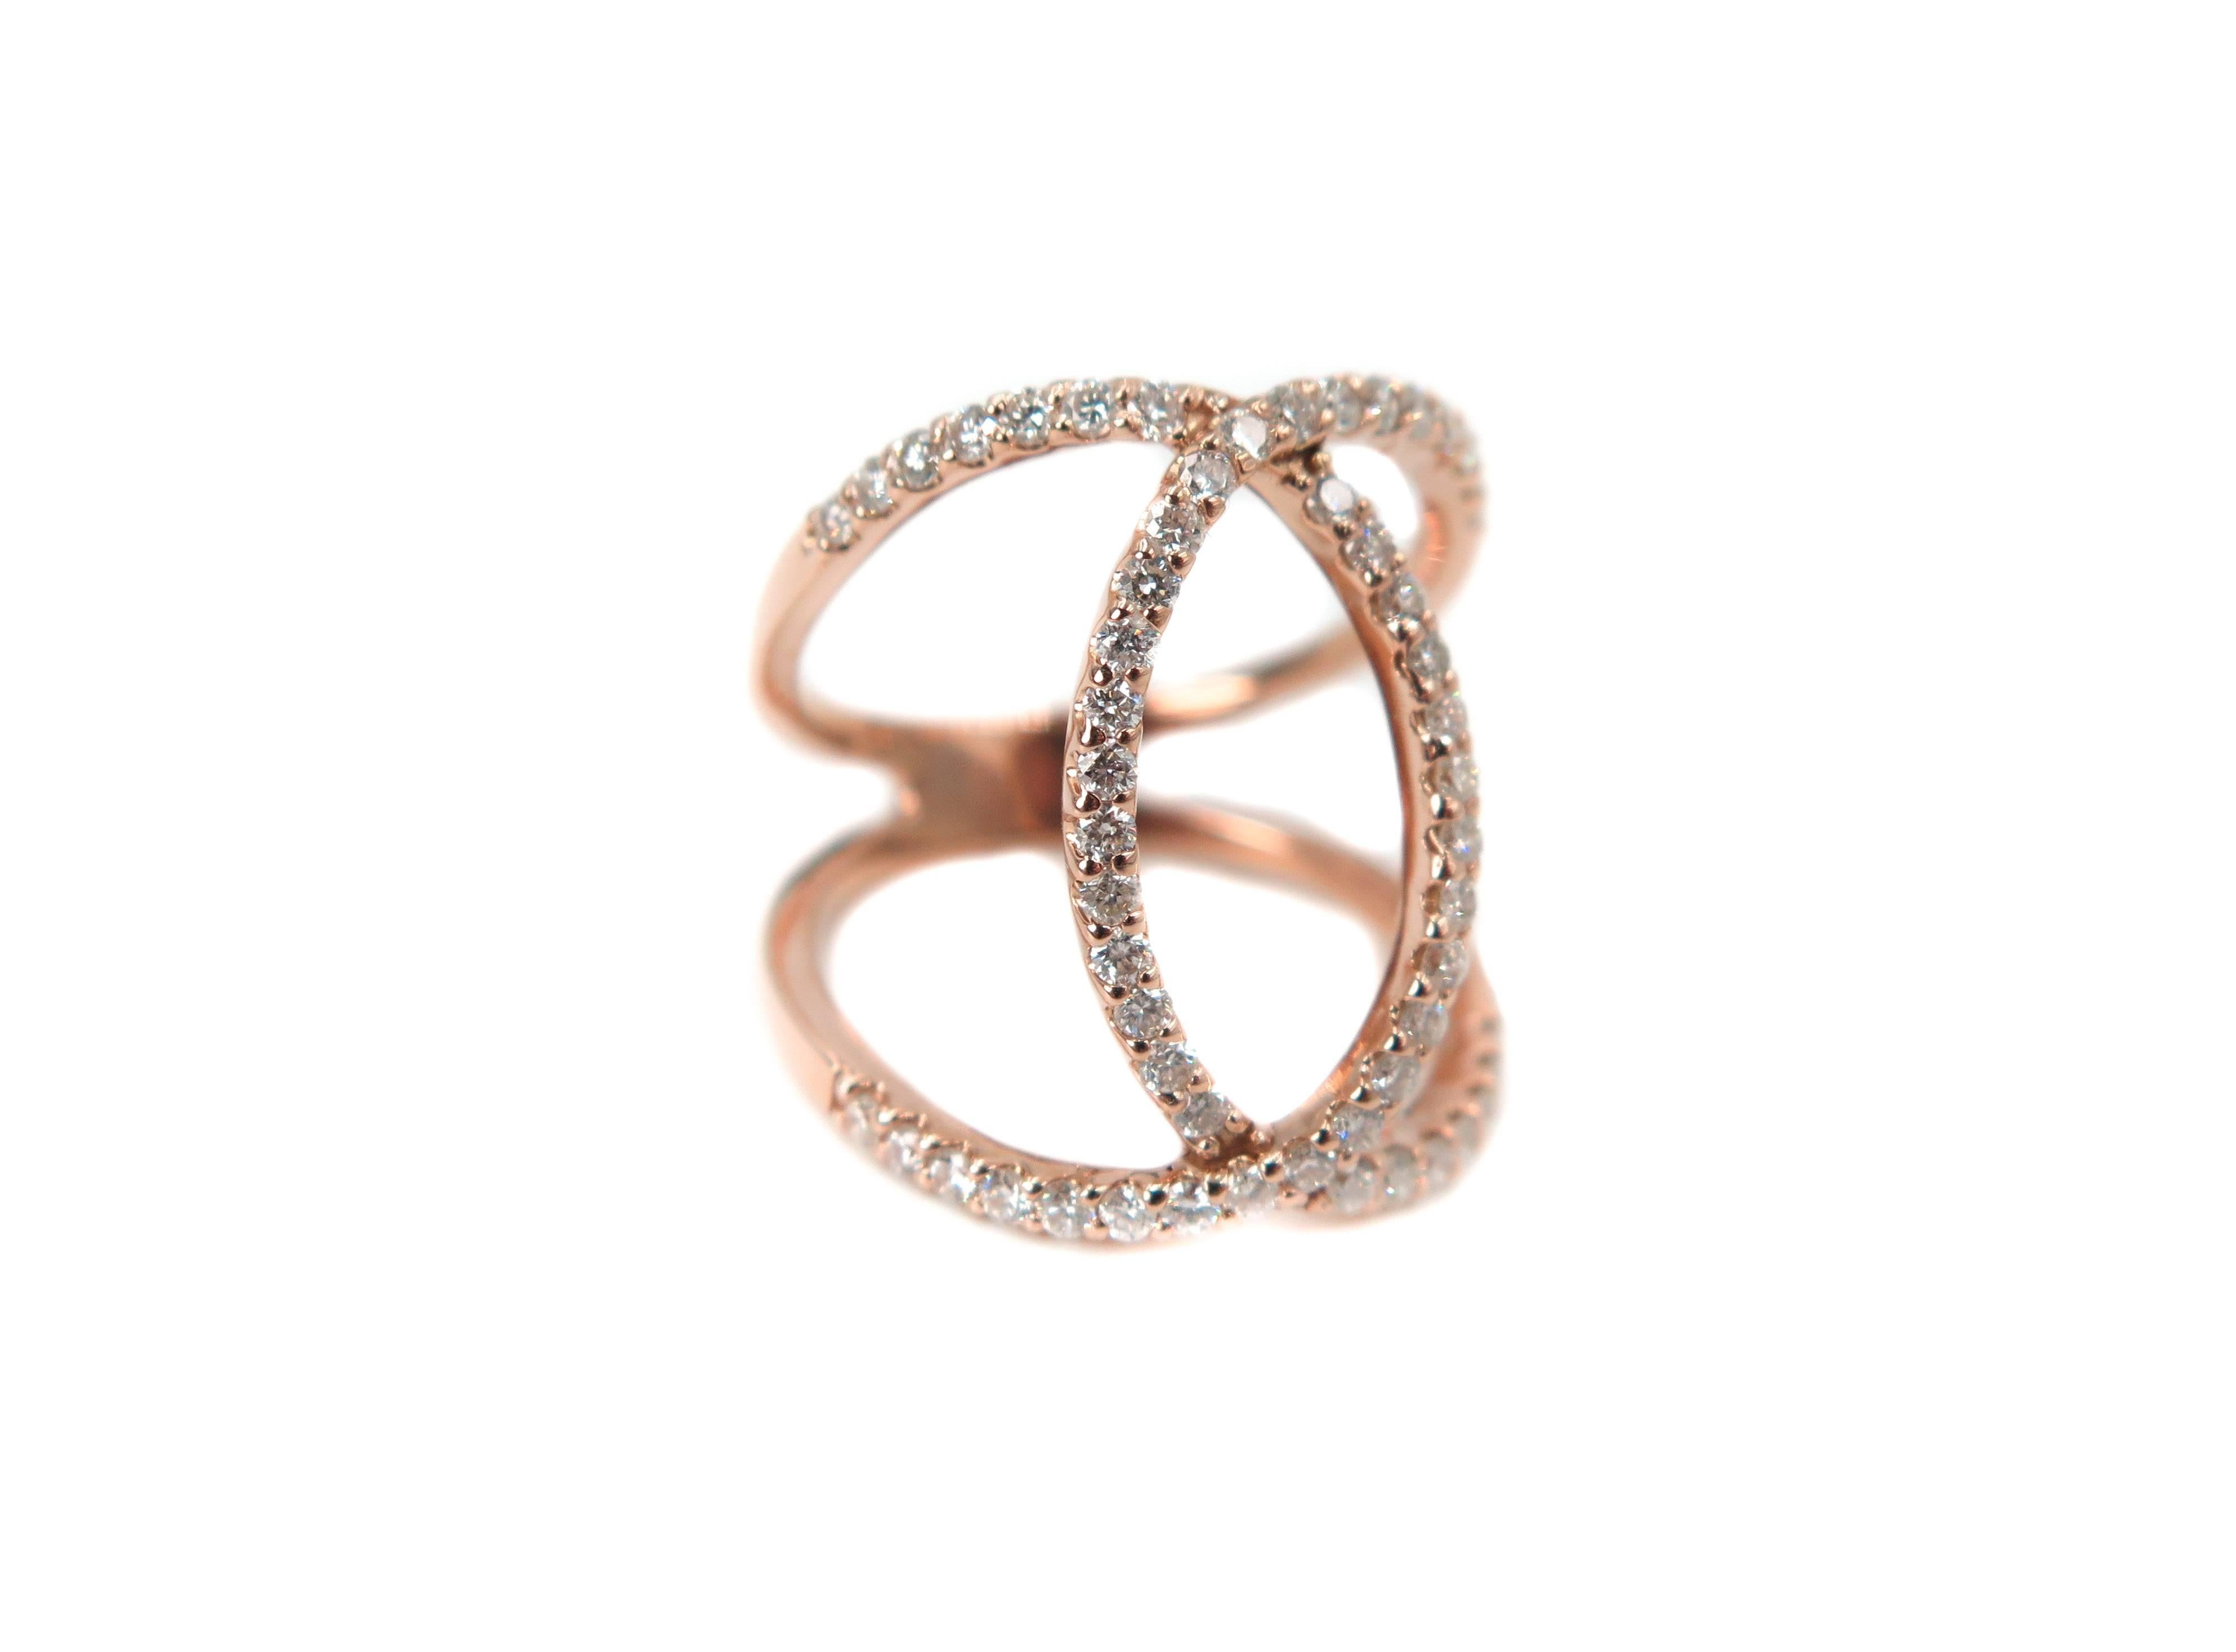 This Diamond Ring boasts two circles of diamonds overlapping for a chic, yet classic appeal. A design with modern trends, integrated with traditional elegance.
Crafted in 14k rose gold and set with approximately 0.50 carats of round brilliant cut